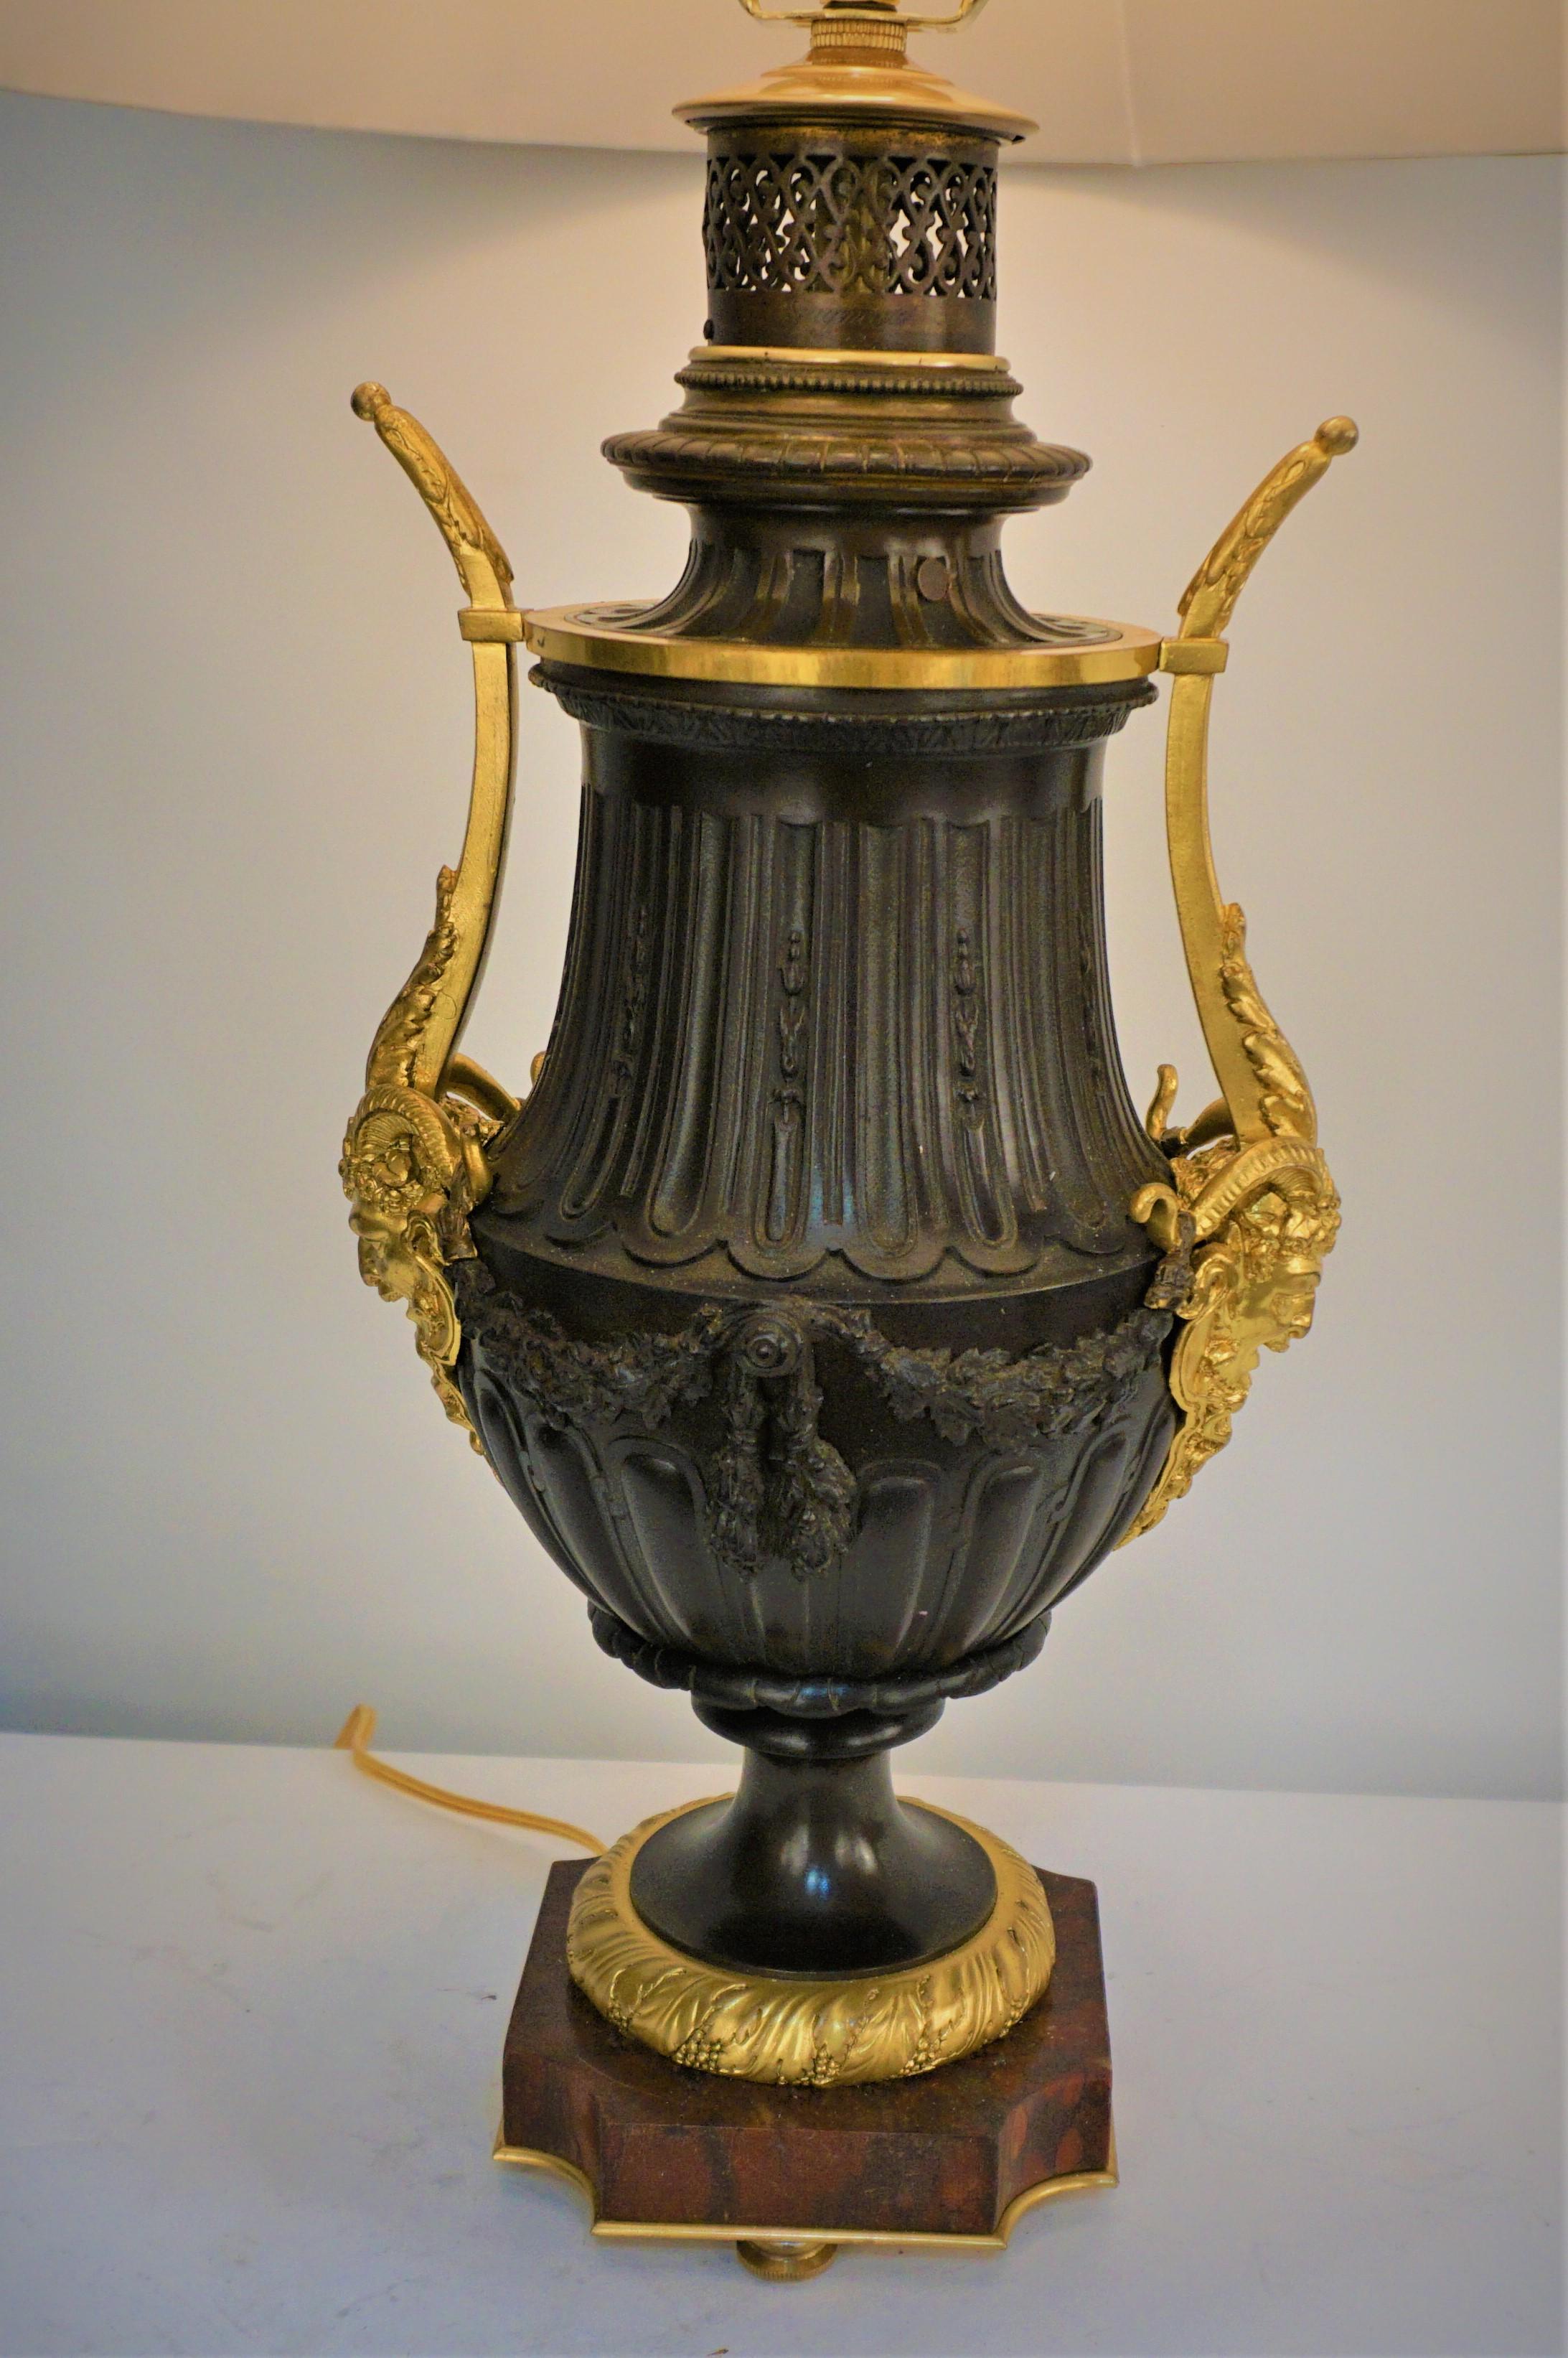 19th century dark brown, glit bronze oil lamp that has been professionally electrified and fitted with box pleat silk lampshade.
3way socket, up to 250watts.